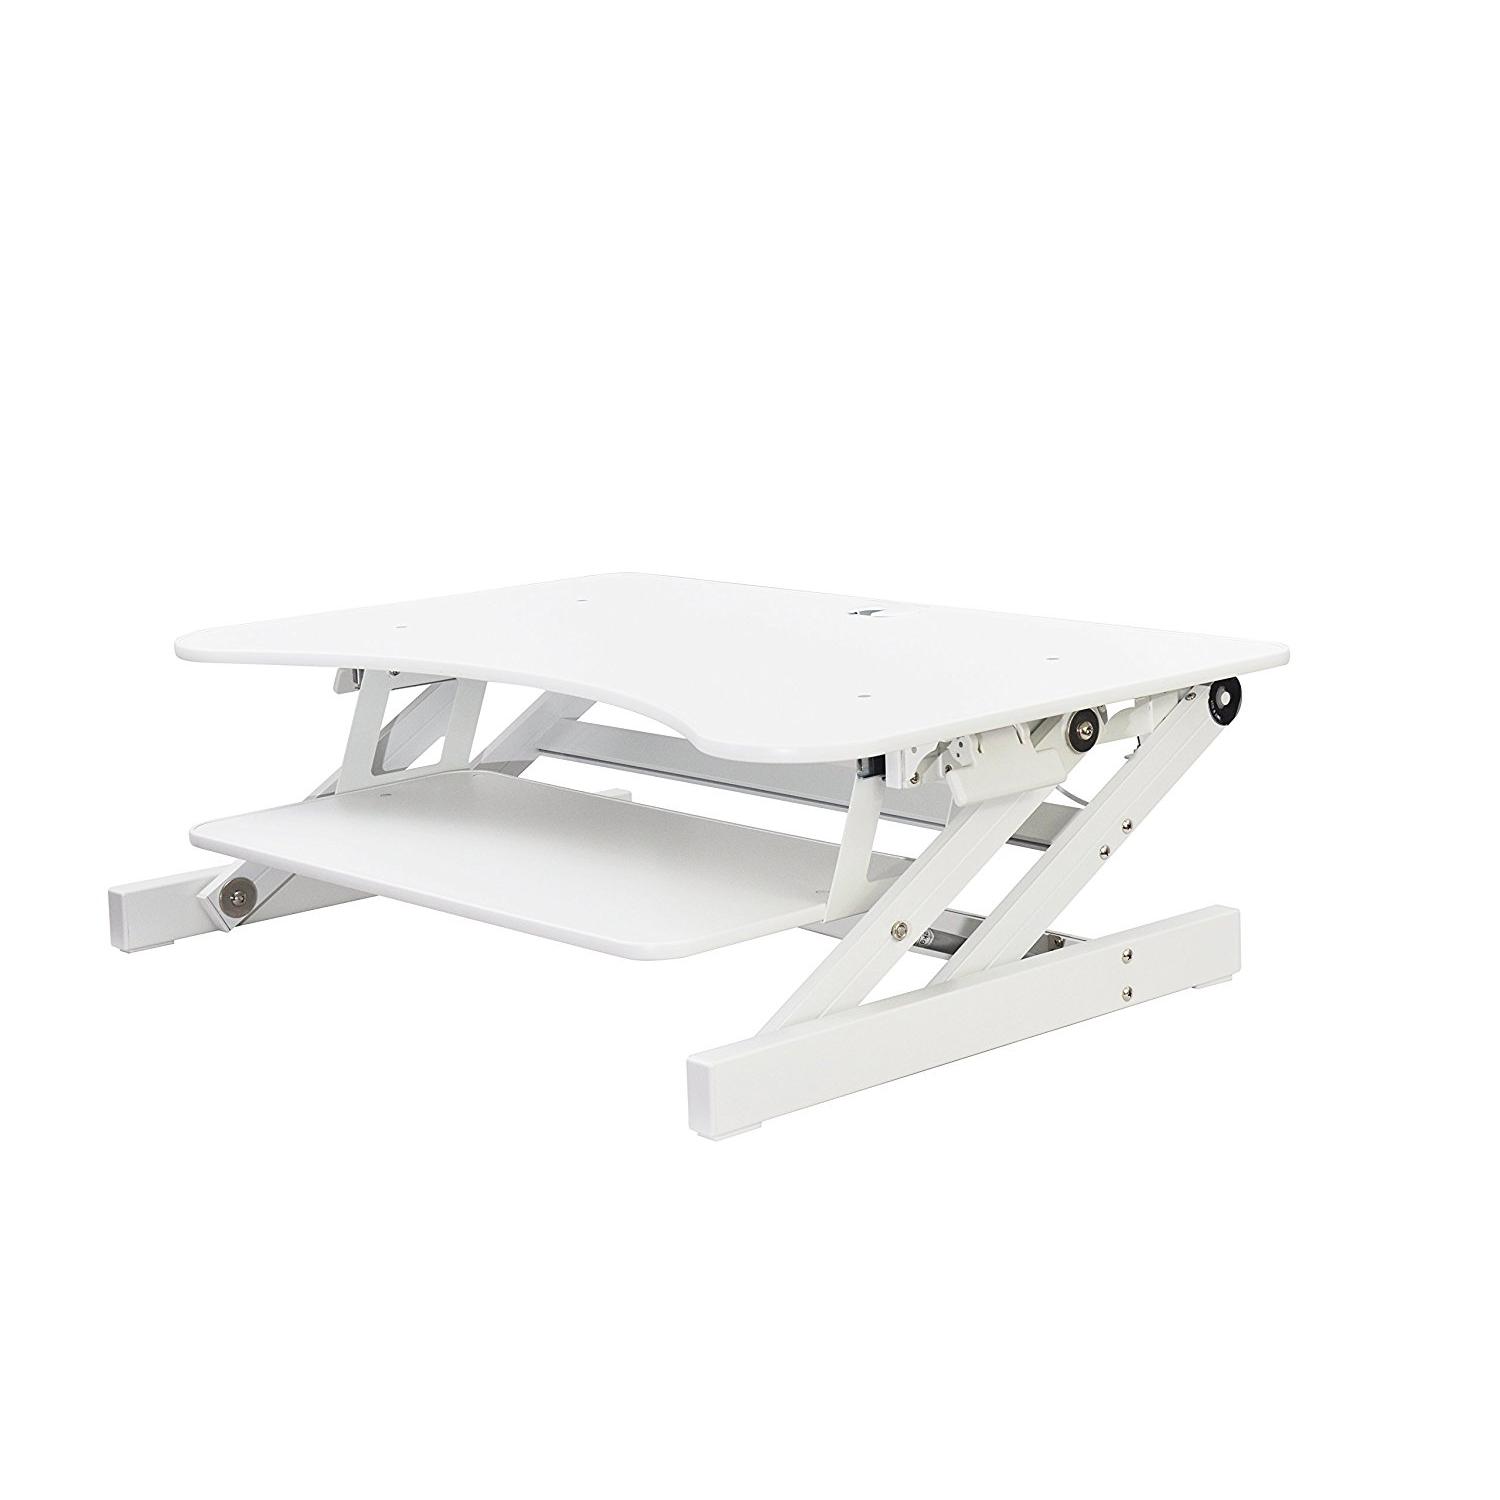 Rocelco EADR Sit-To-Stand 37-Inch Adjustable Desk Riser WHITE - Click Image to Close